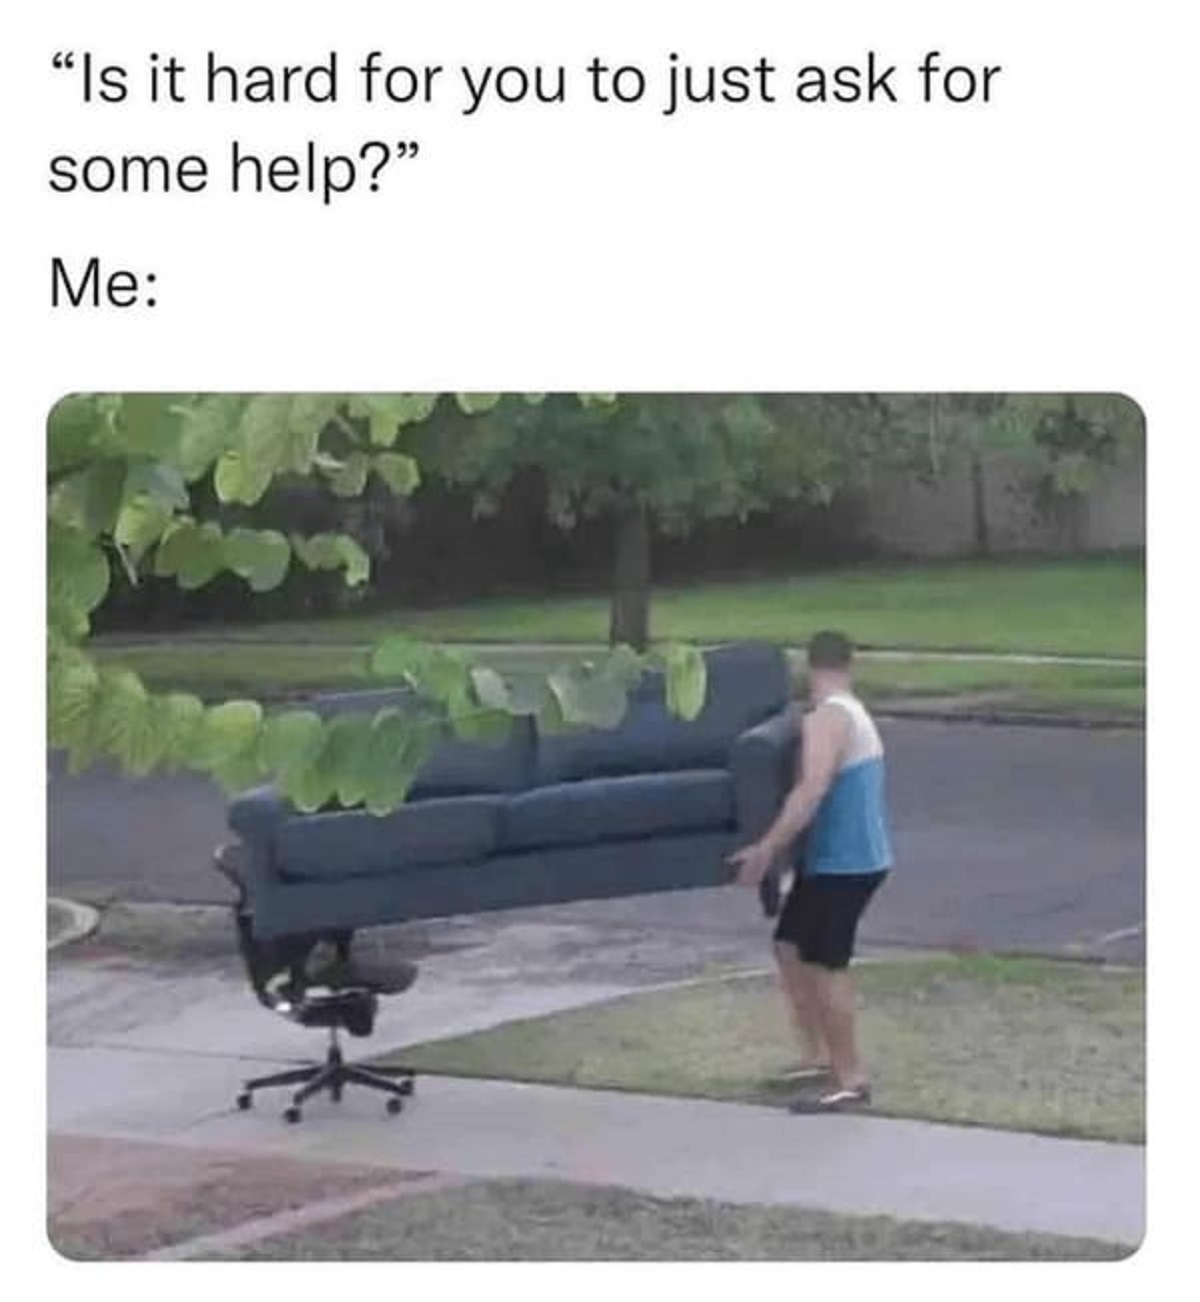 introverts asking for help meme - "Is it hard for you to just ask for some help?" Me